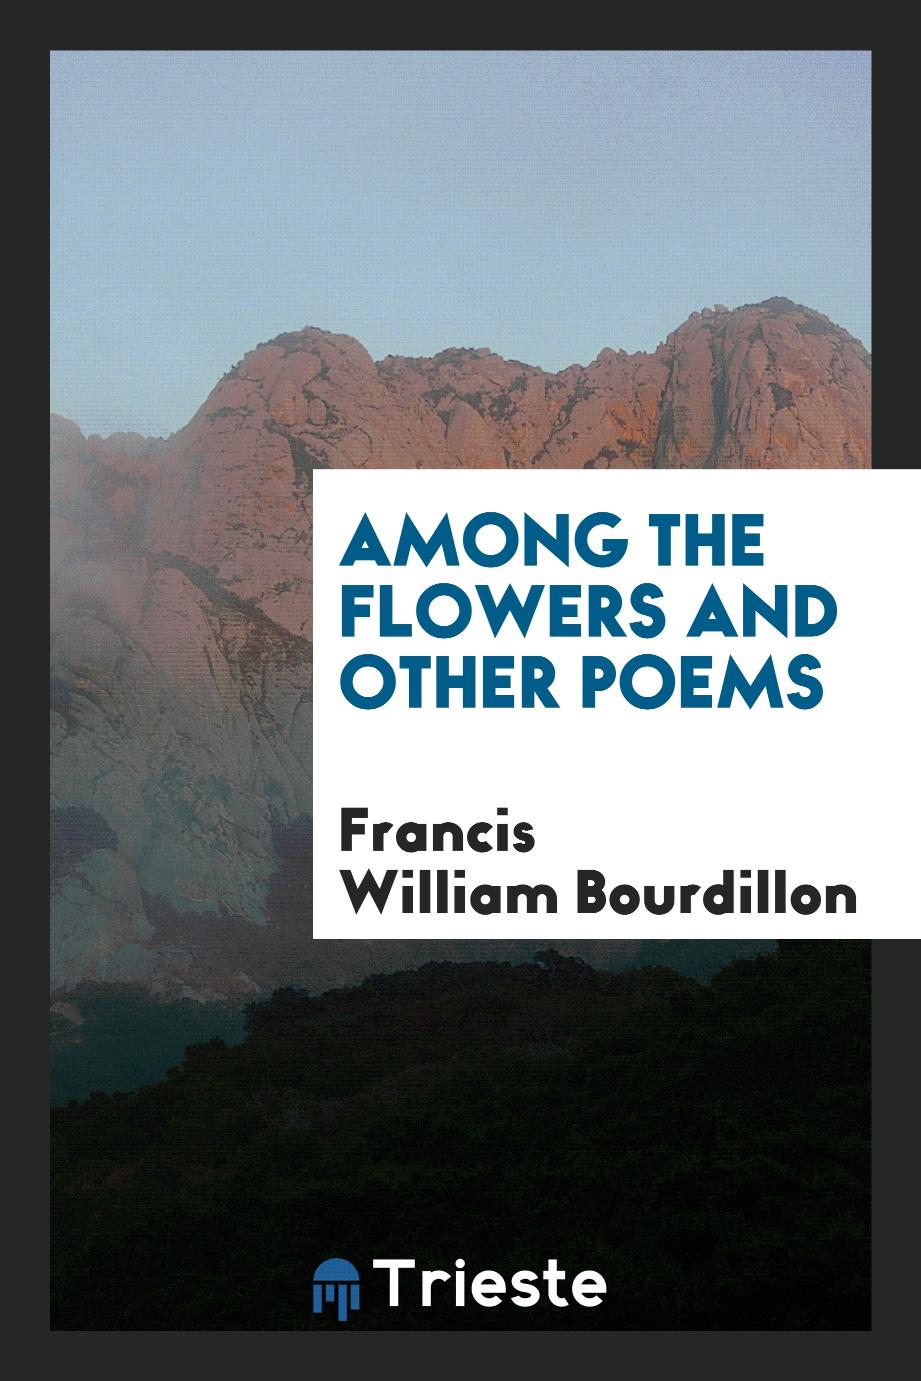 Among the flowers and other poems